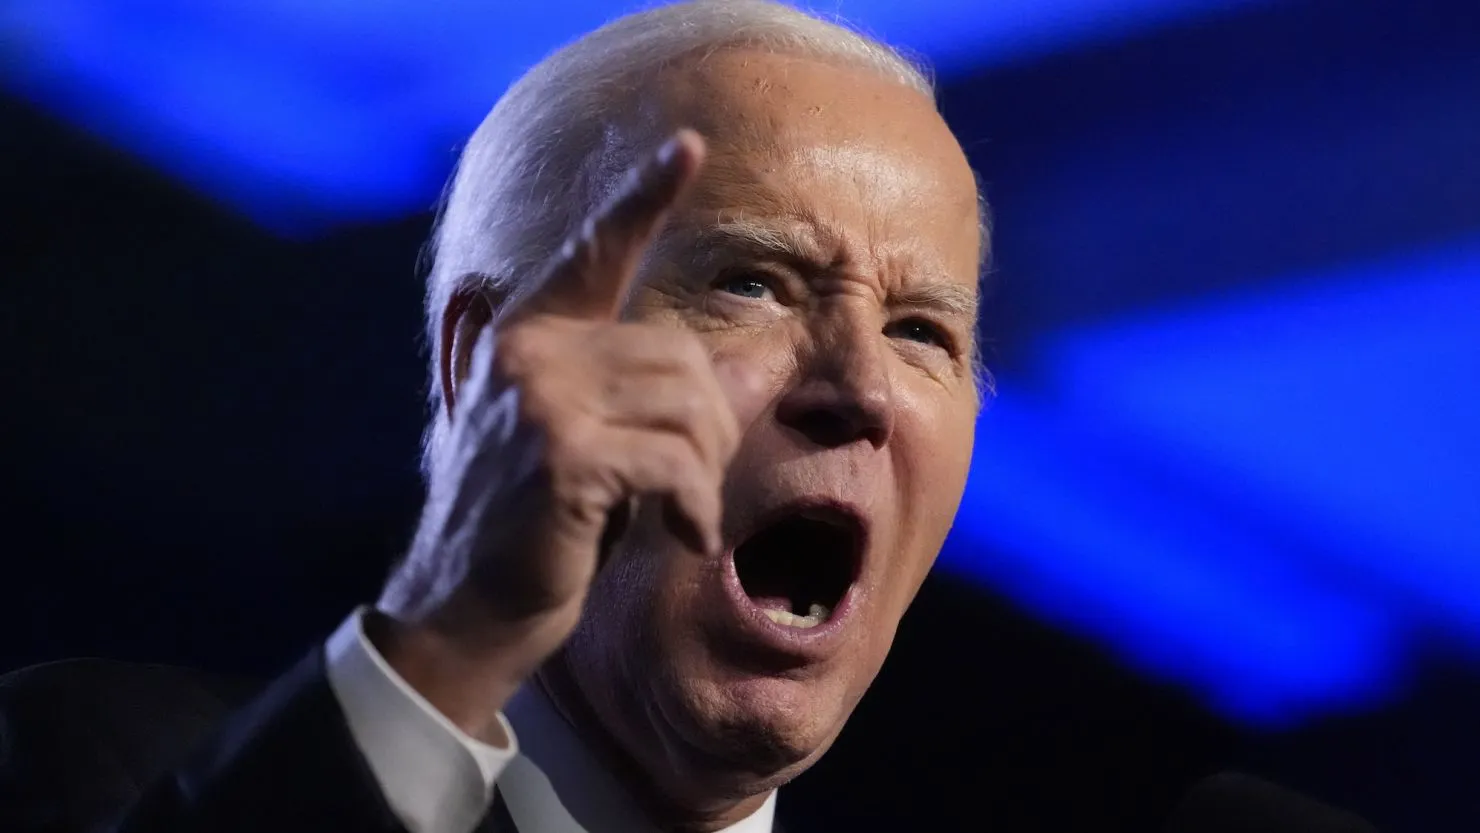 Biden Told NOT To Talk About His Own Record But To Attack Trump During Debate